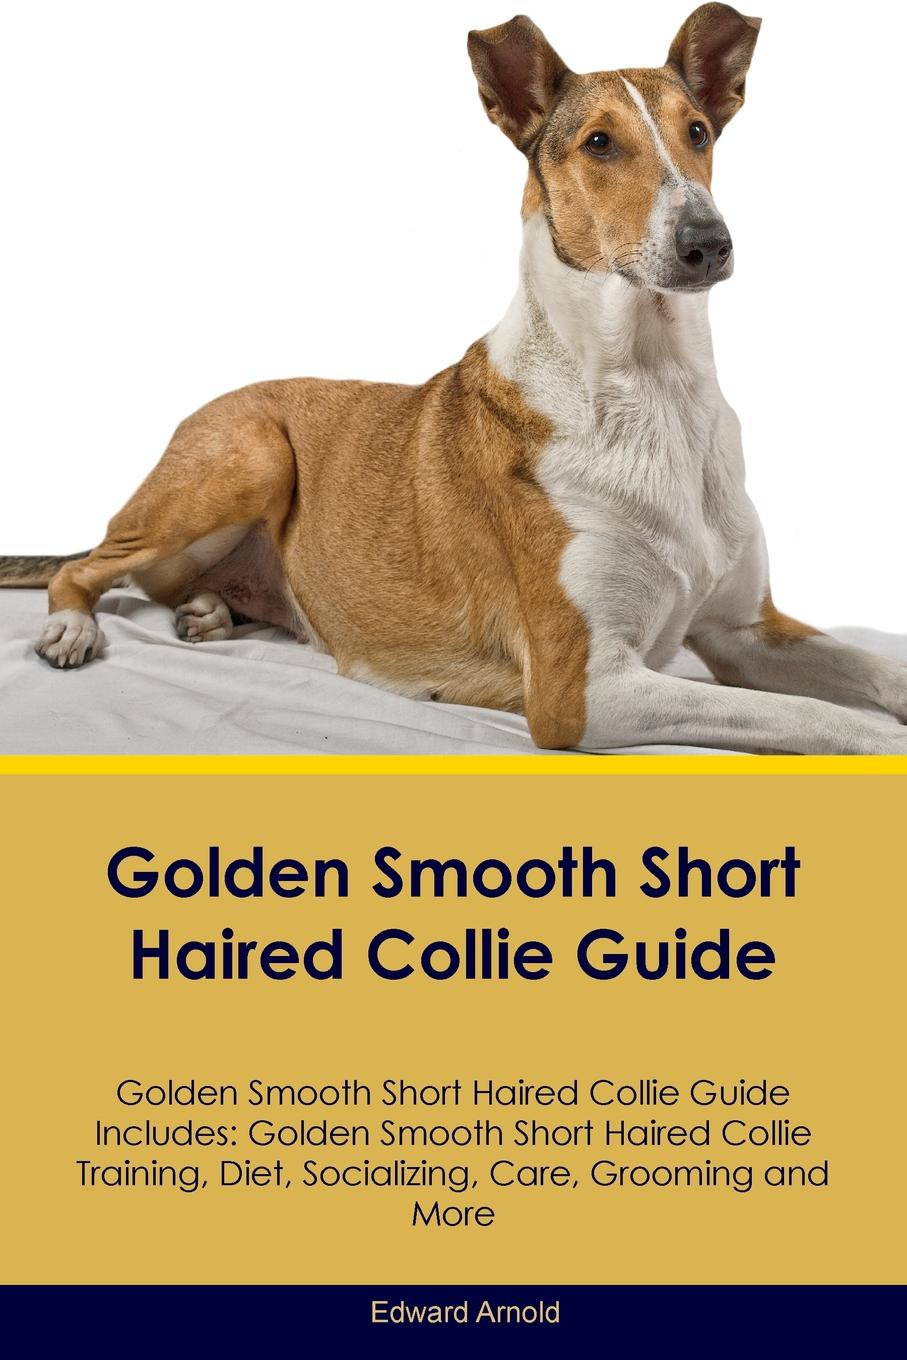 Golden Smooth Short Haired Collie Guide Golden Smooth Short Haired Collie Guide Includes. Golden Smooth Short Haired Collie Training, Diet, Socializing, Care, Grooming, Breeding and More